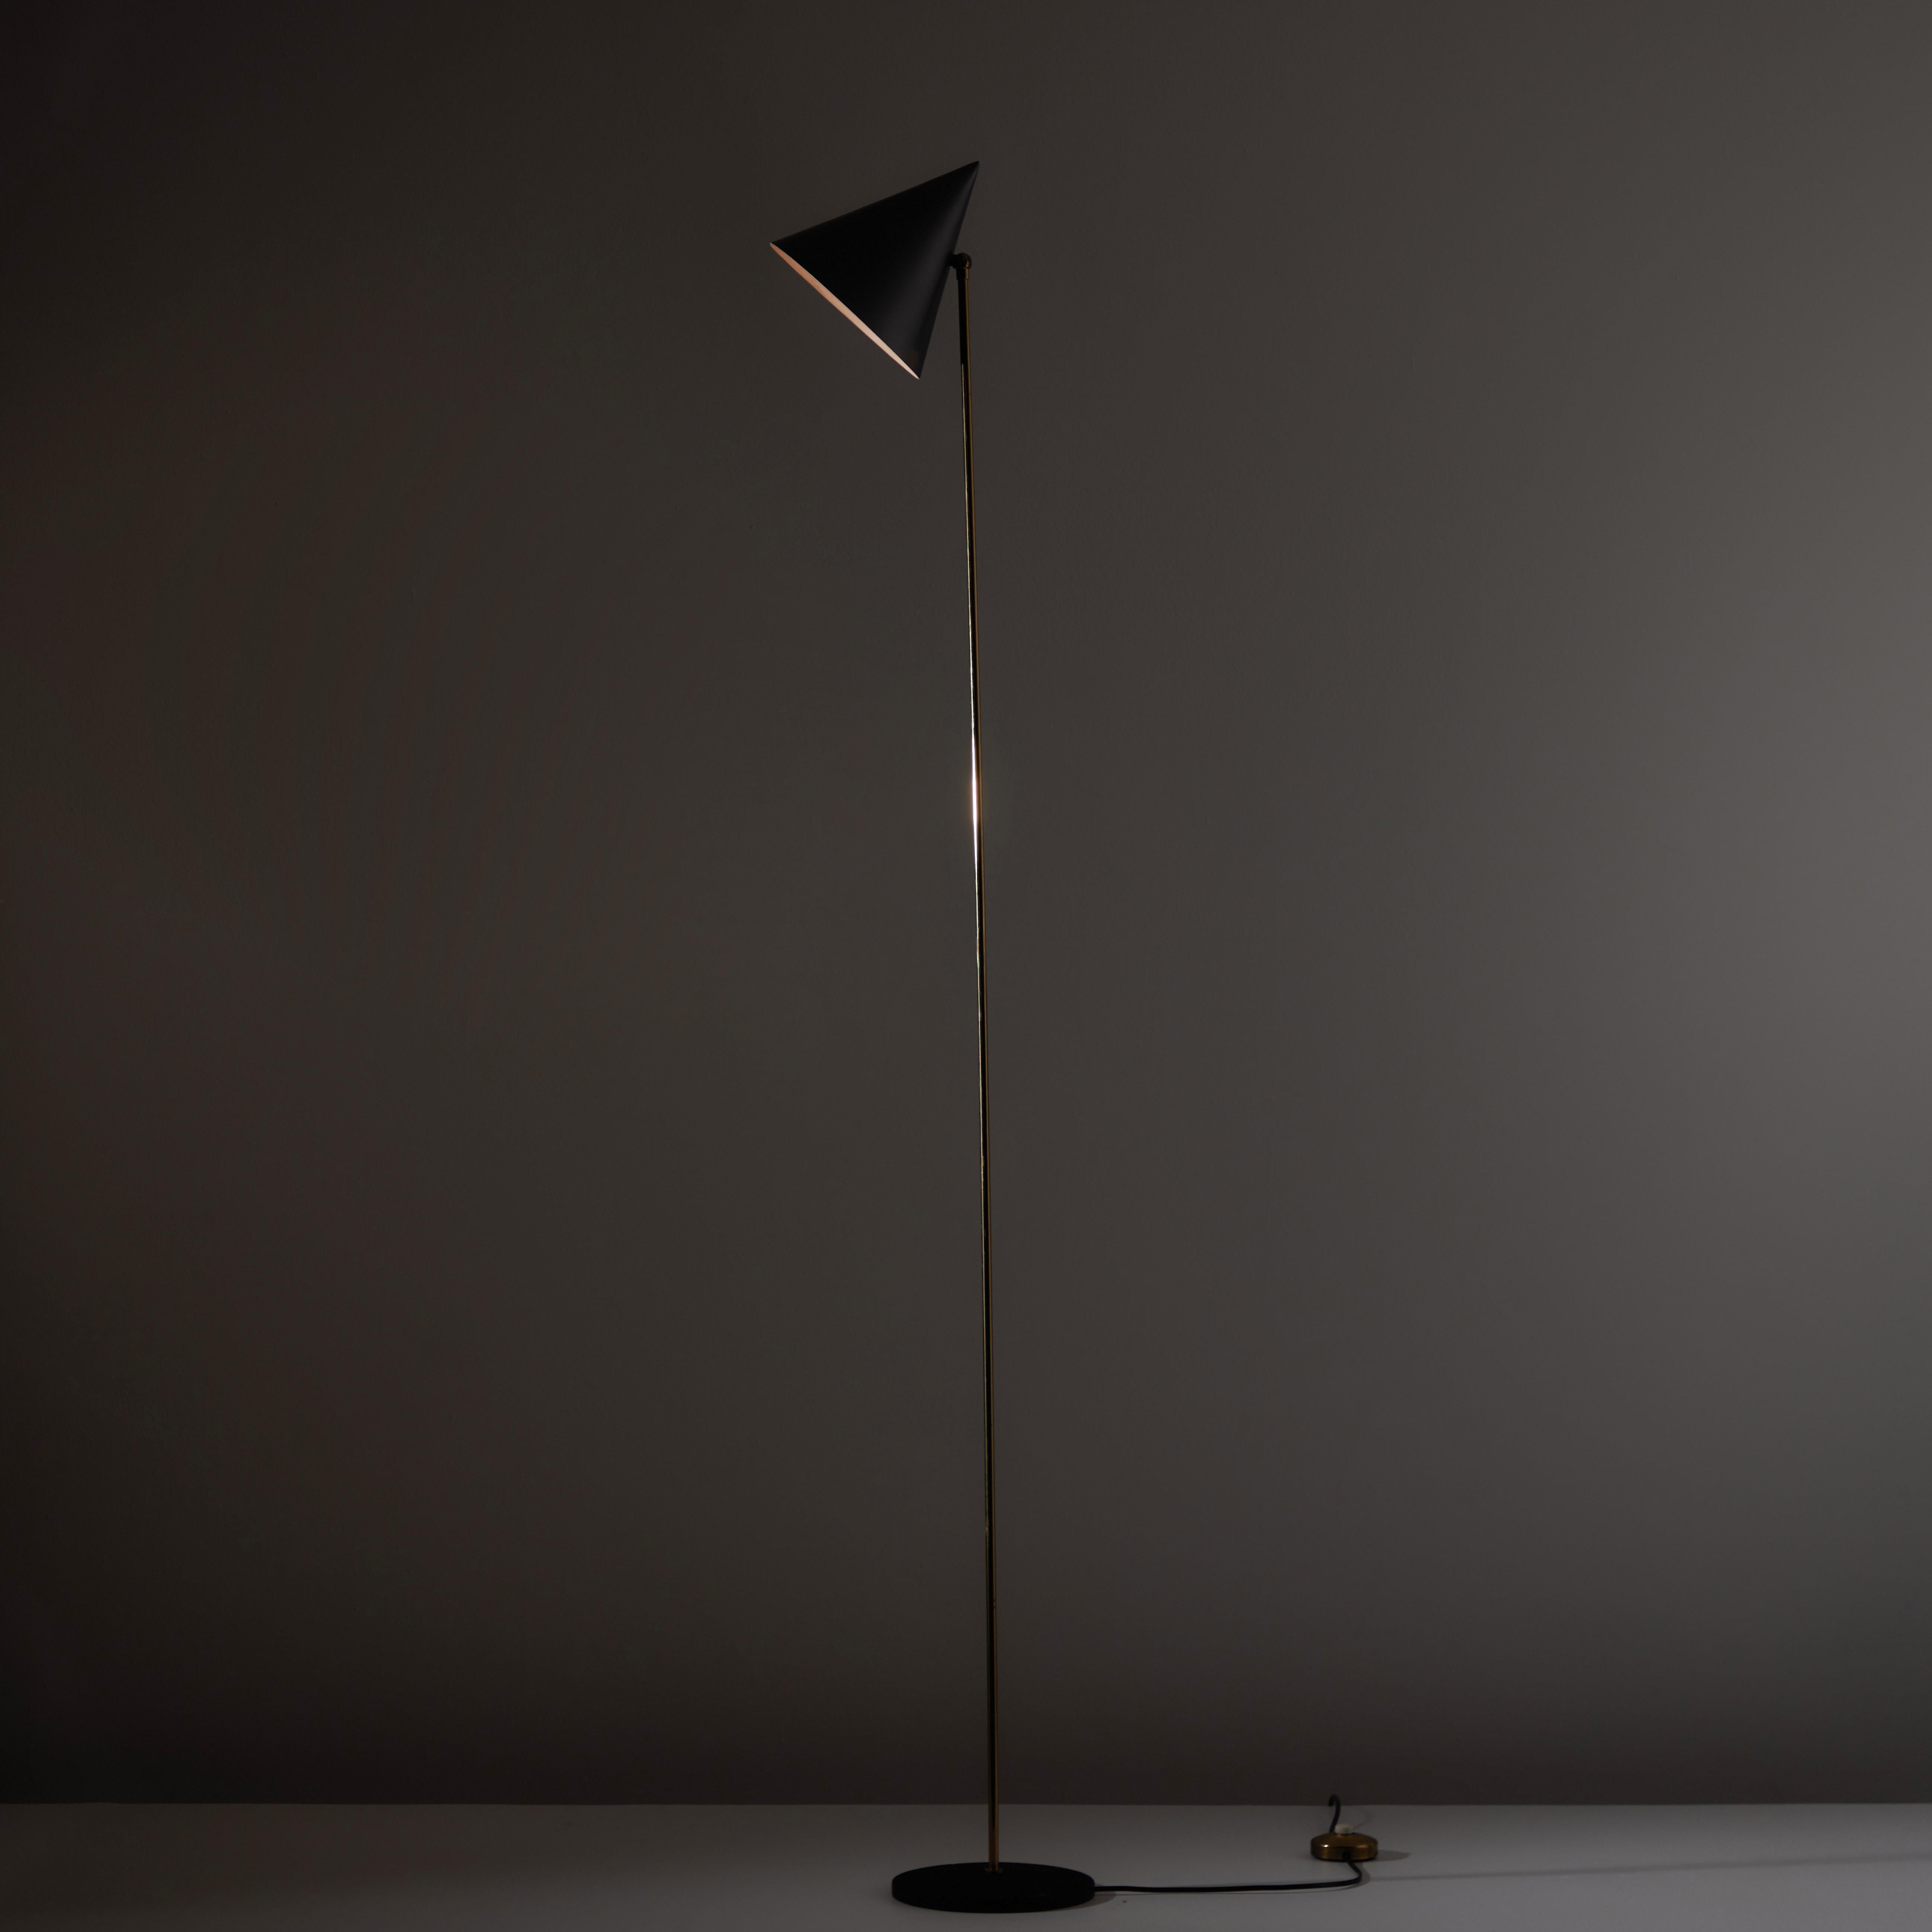 LTE 5 floor lamp by Luigi Caccia Dominioni for Azucena. Designed and manufactured in Italy, 1953. Slender enameled brass floor lamp with sharp conical shade and cast iron base. We recommend using one 60w max E27 bulb. Wired for US standards. Bulb